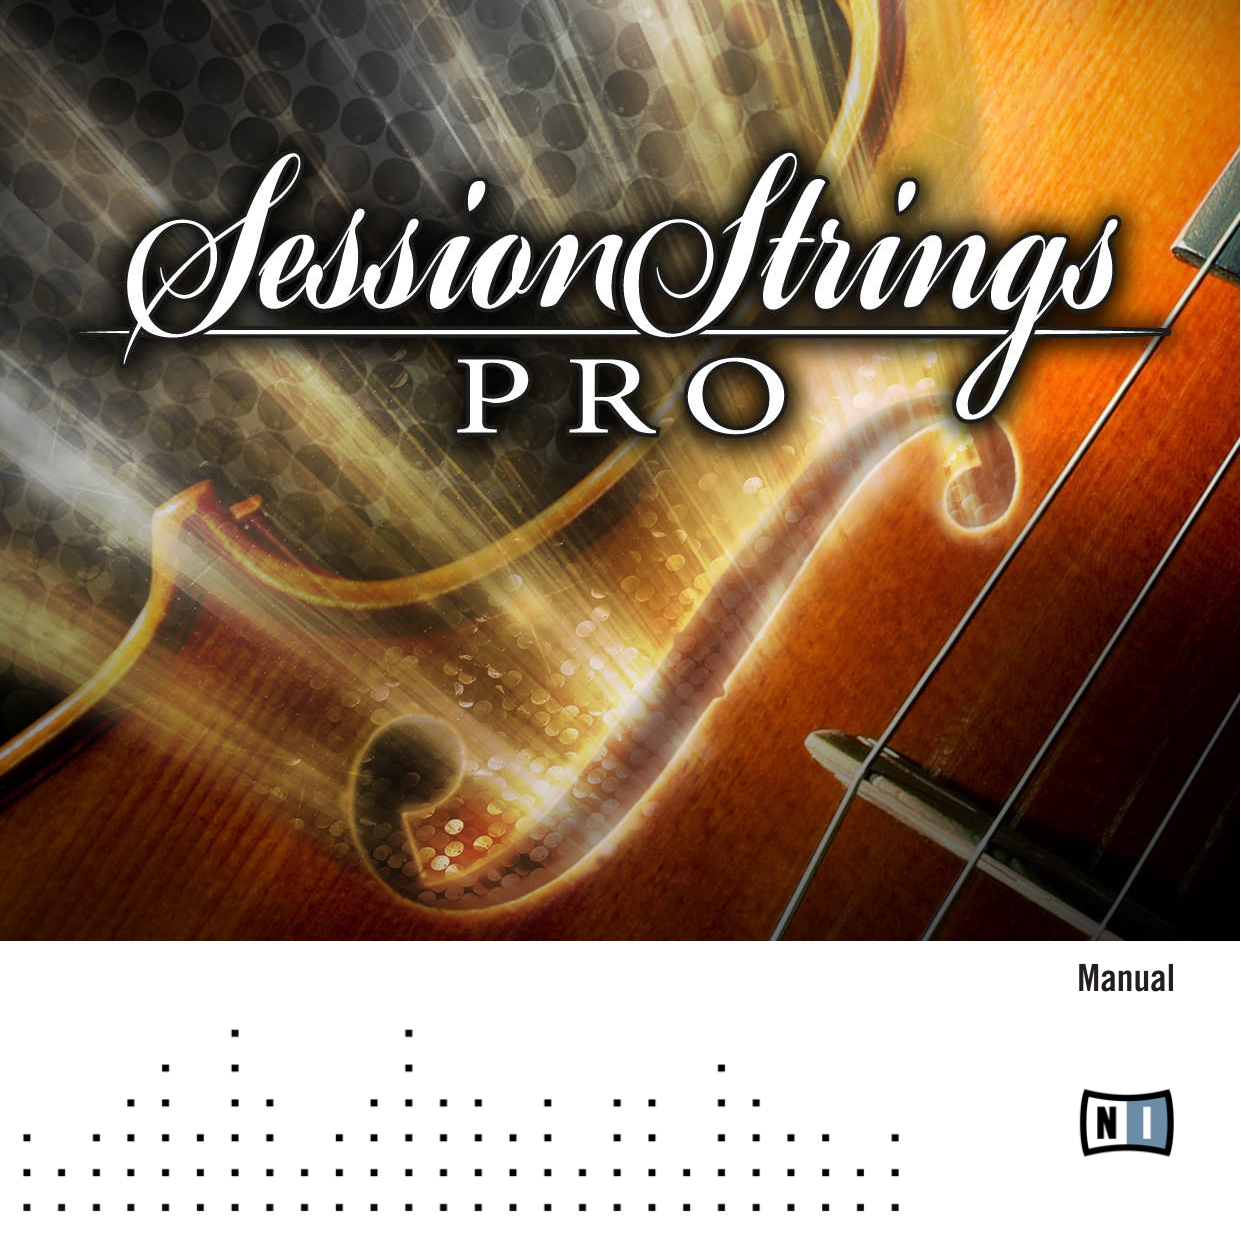 session horns native instruments free download